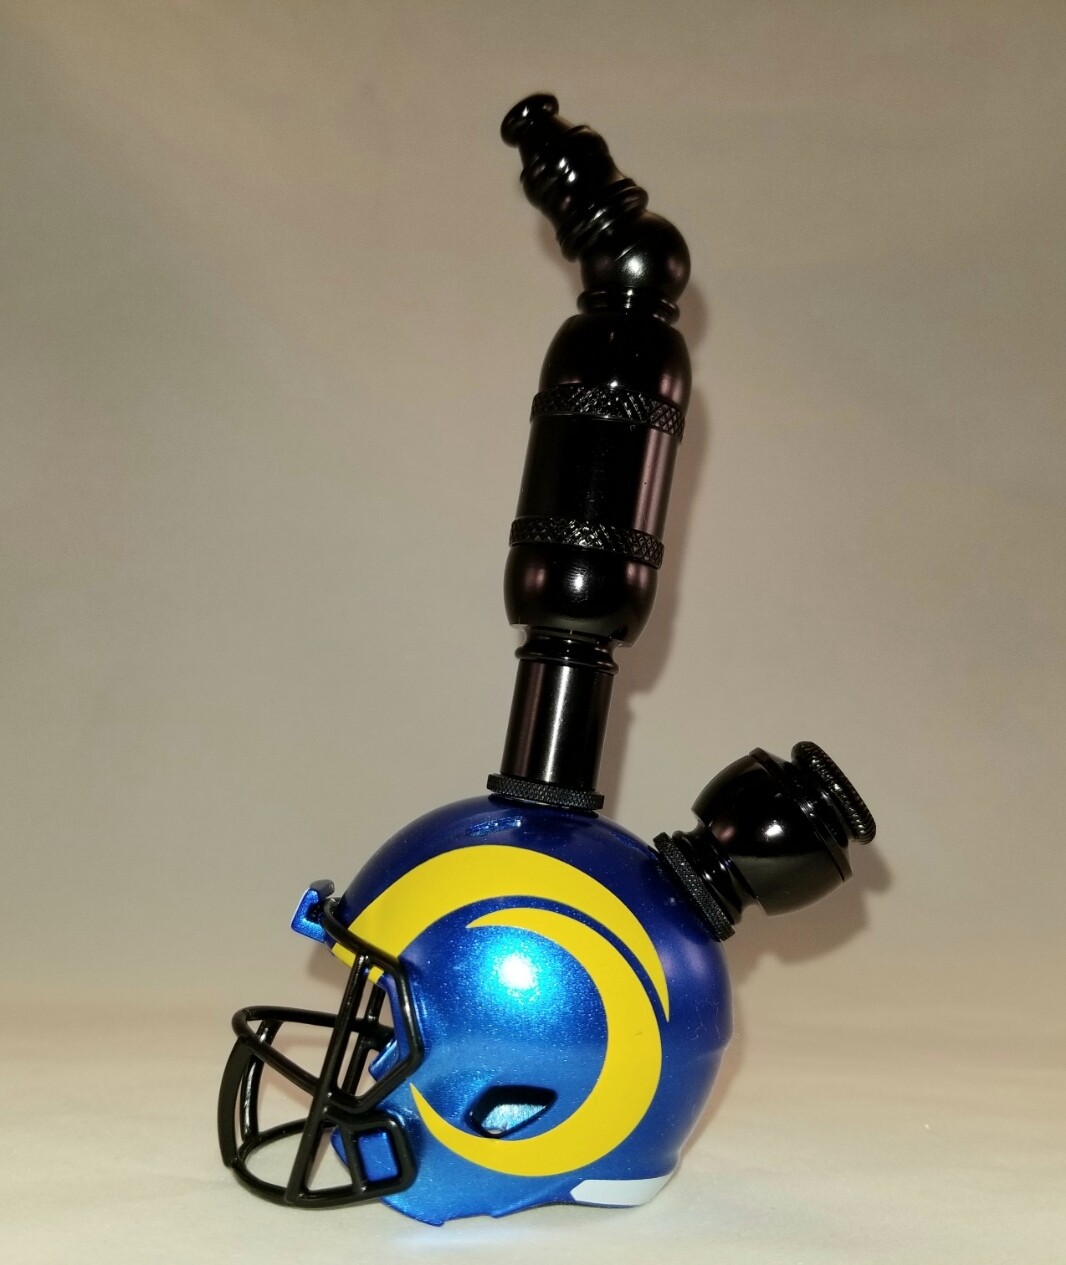 NEW LOS ANGELES RAMS NFL "BAD ASS" FOOTBALL HELMET SMOKING PIPE Upright/Black Anodized/New